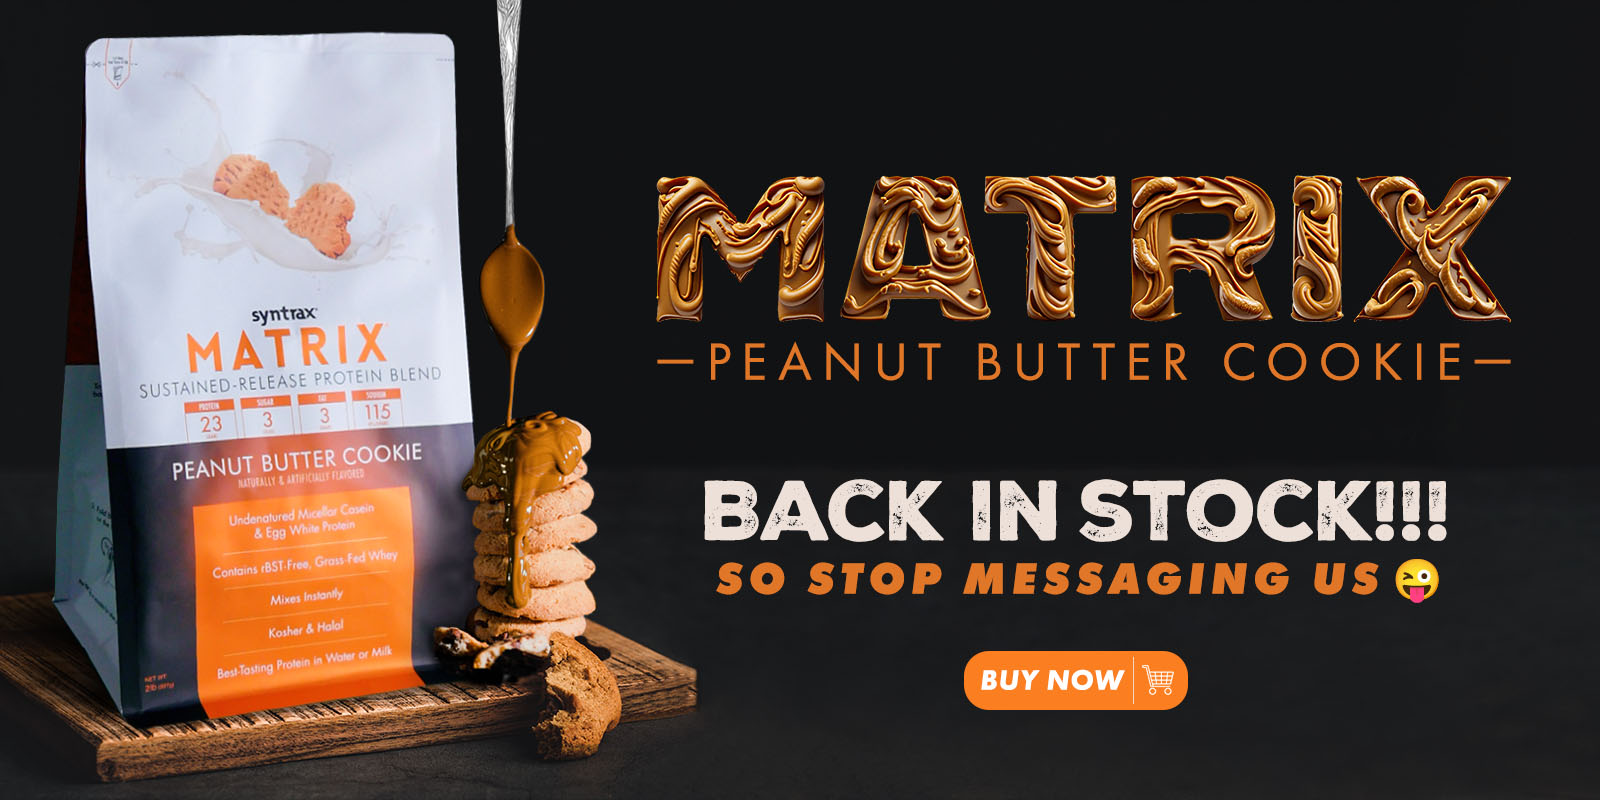 Matrix Peanut Butter Cookie is back in stock